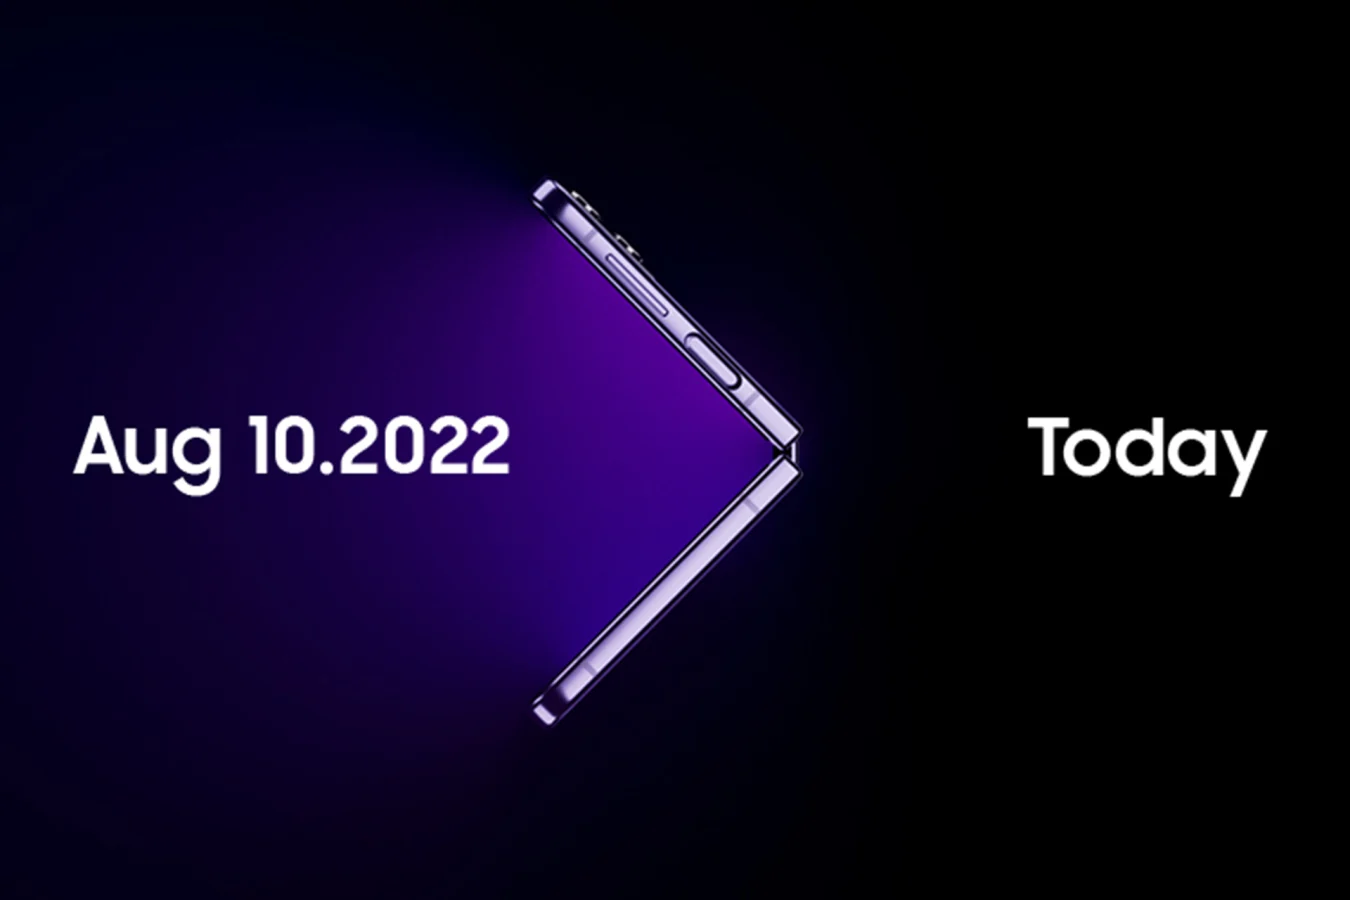 Samsung Galaxy Unpacked trailer for August 2022